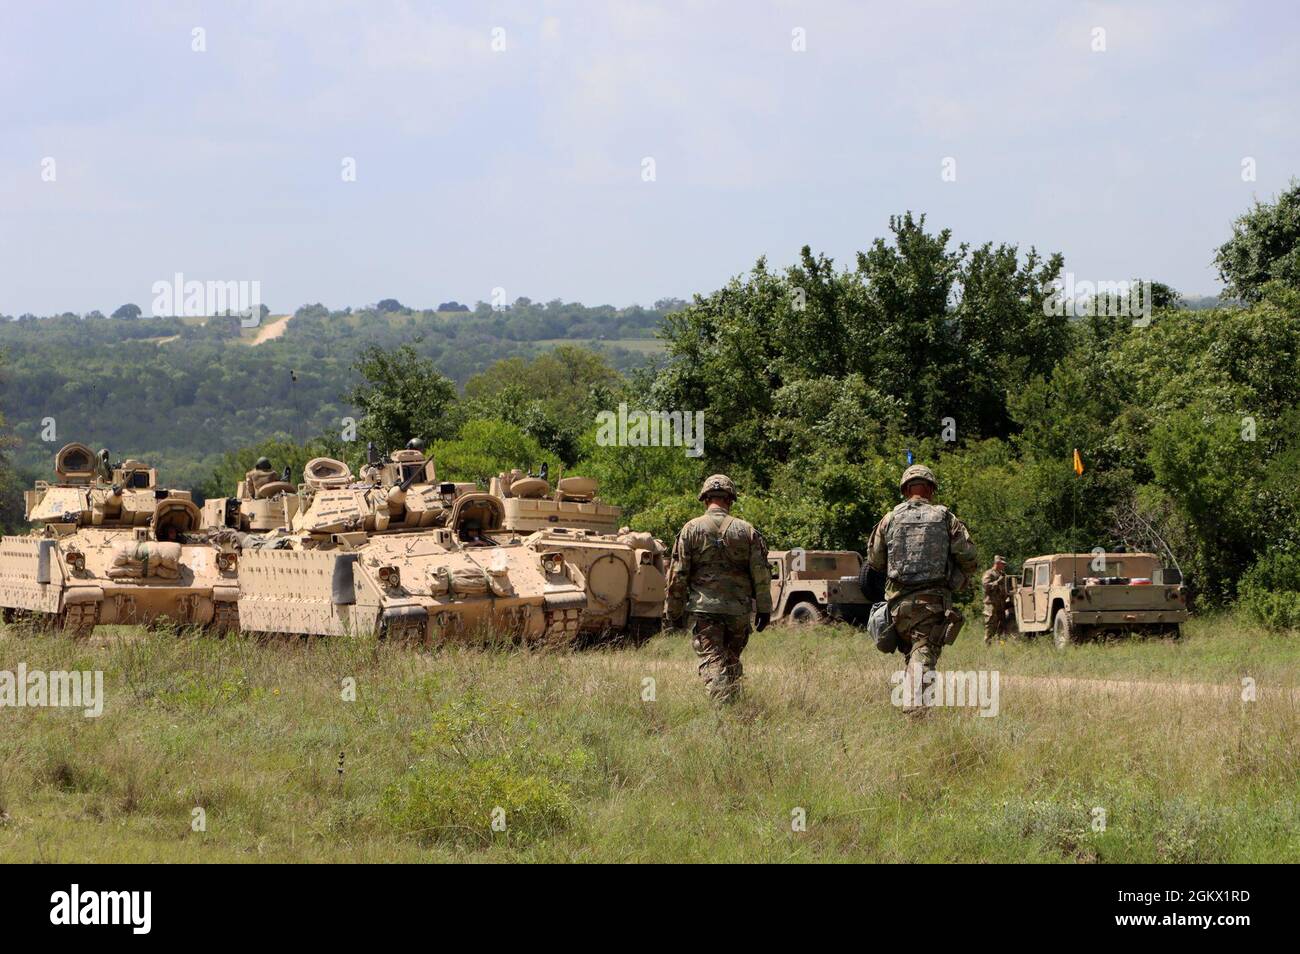 U.S. Army National Guard Staff Sgt. James Hamilton and Sgt. 1st Class Matthew Iacobucci, Observer, Coach, Trainers, with Army National Guard Operations Group Wolf prepare to evaluate Soldiers with P Troop, 4/278 Armored Reconnaissance Squadron, 278th Armored Calvary Regiment, Tennessee Army National Guard July 14, 2021 during eXportable Combat Training Capability 21-03 at Fort Hood, Texas. OCTs guide rotational units through various combat training scenarios to evaluate their proficiency in effectively conducting collect tasks. Stock Photo